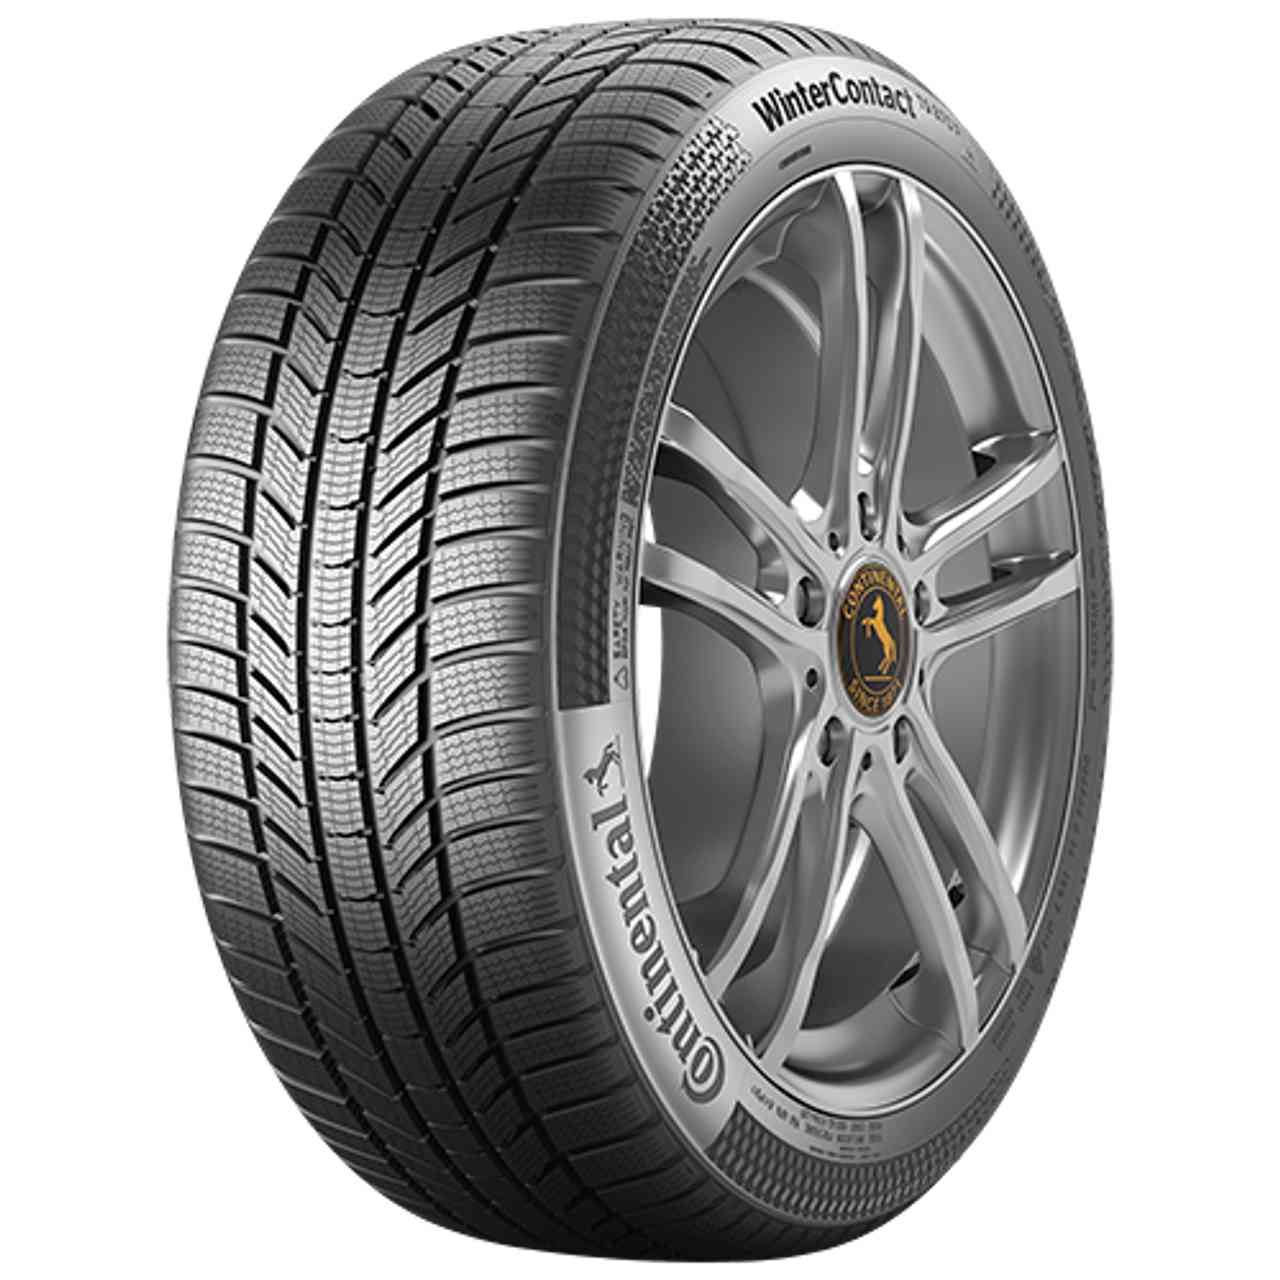 CONTINENTAL WINTERCONTACT TS 870 P (EVc) 215/55R17 98V BSW von Continental